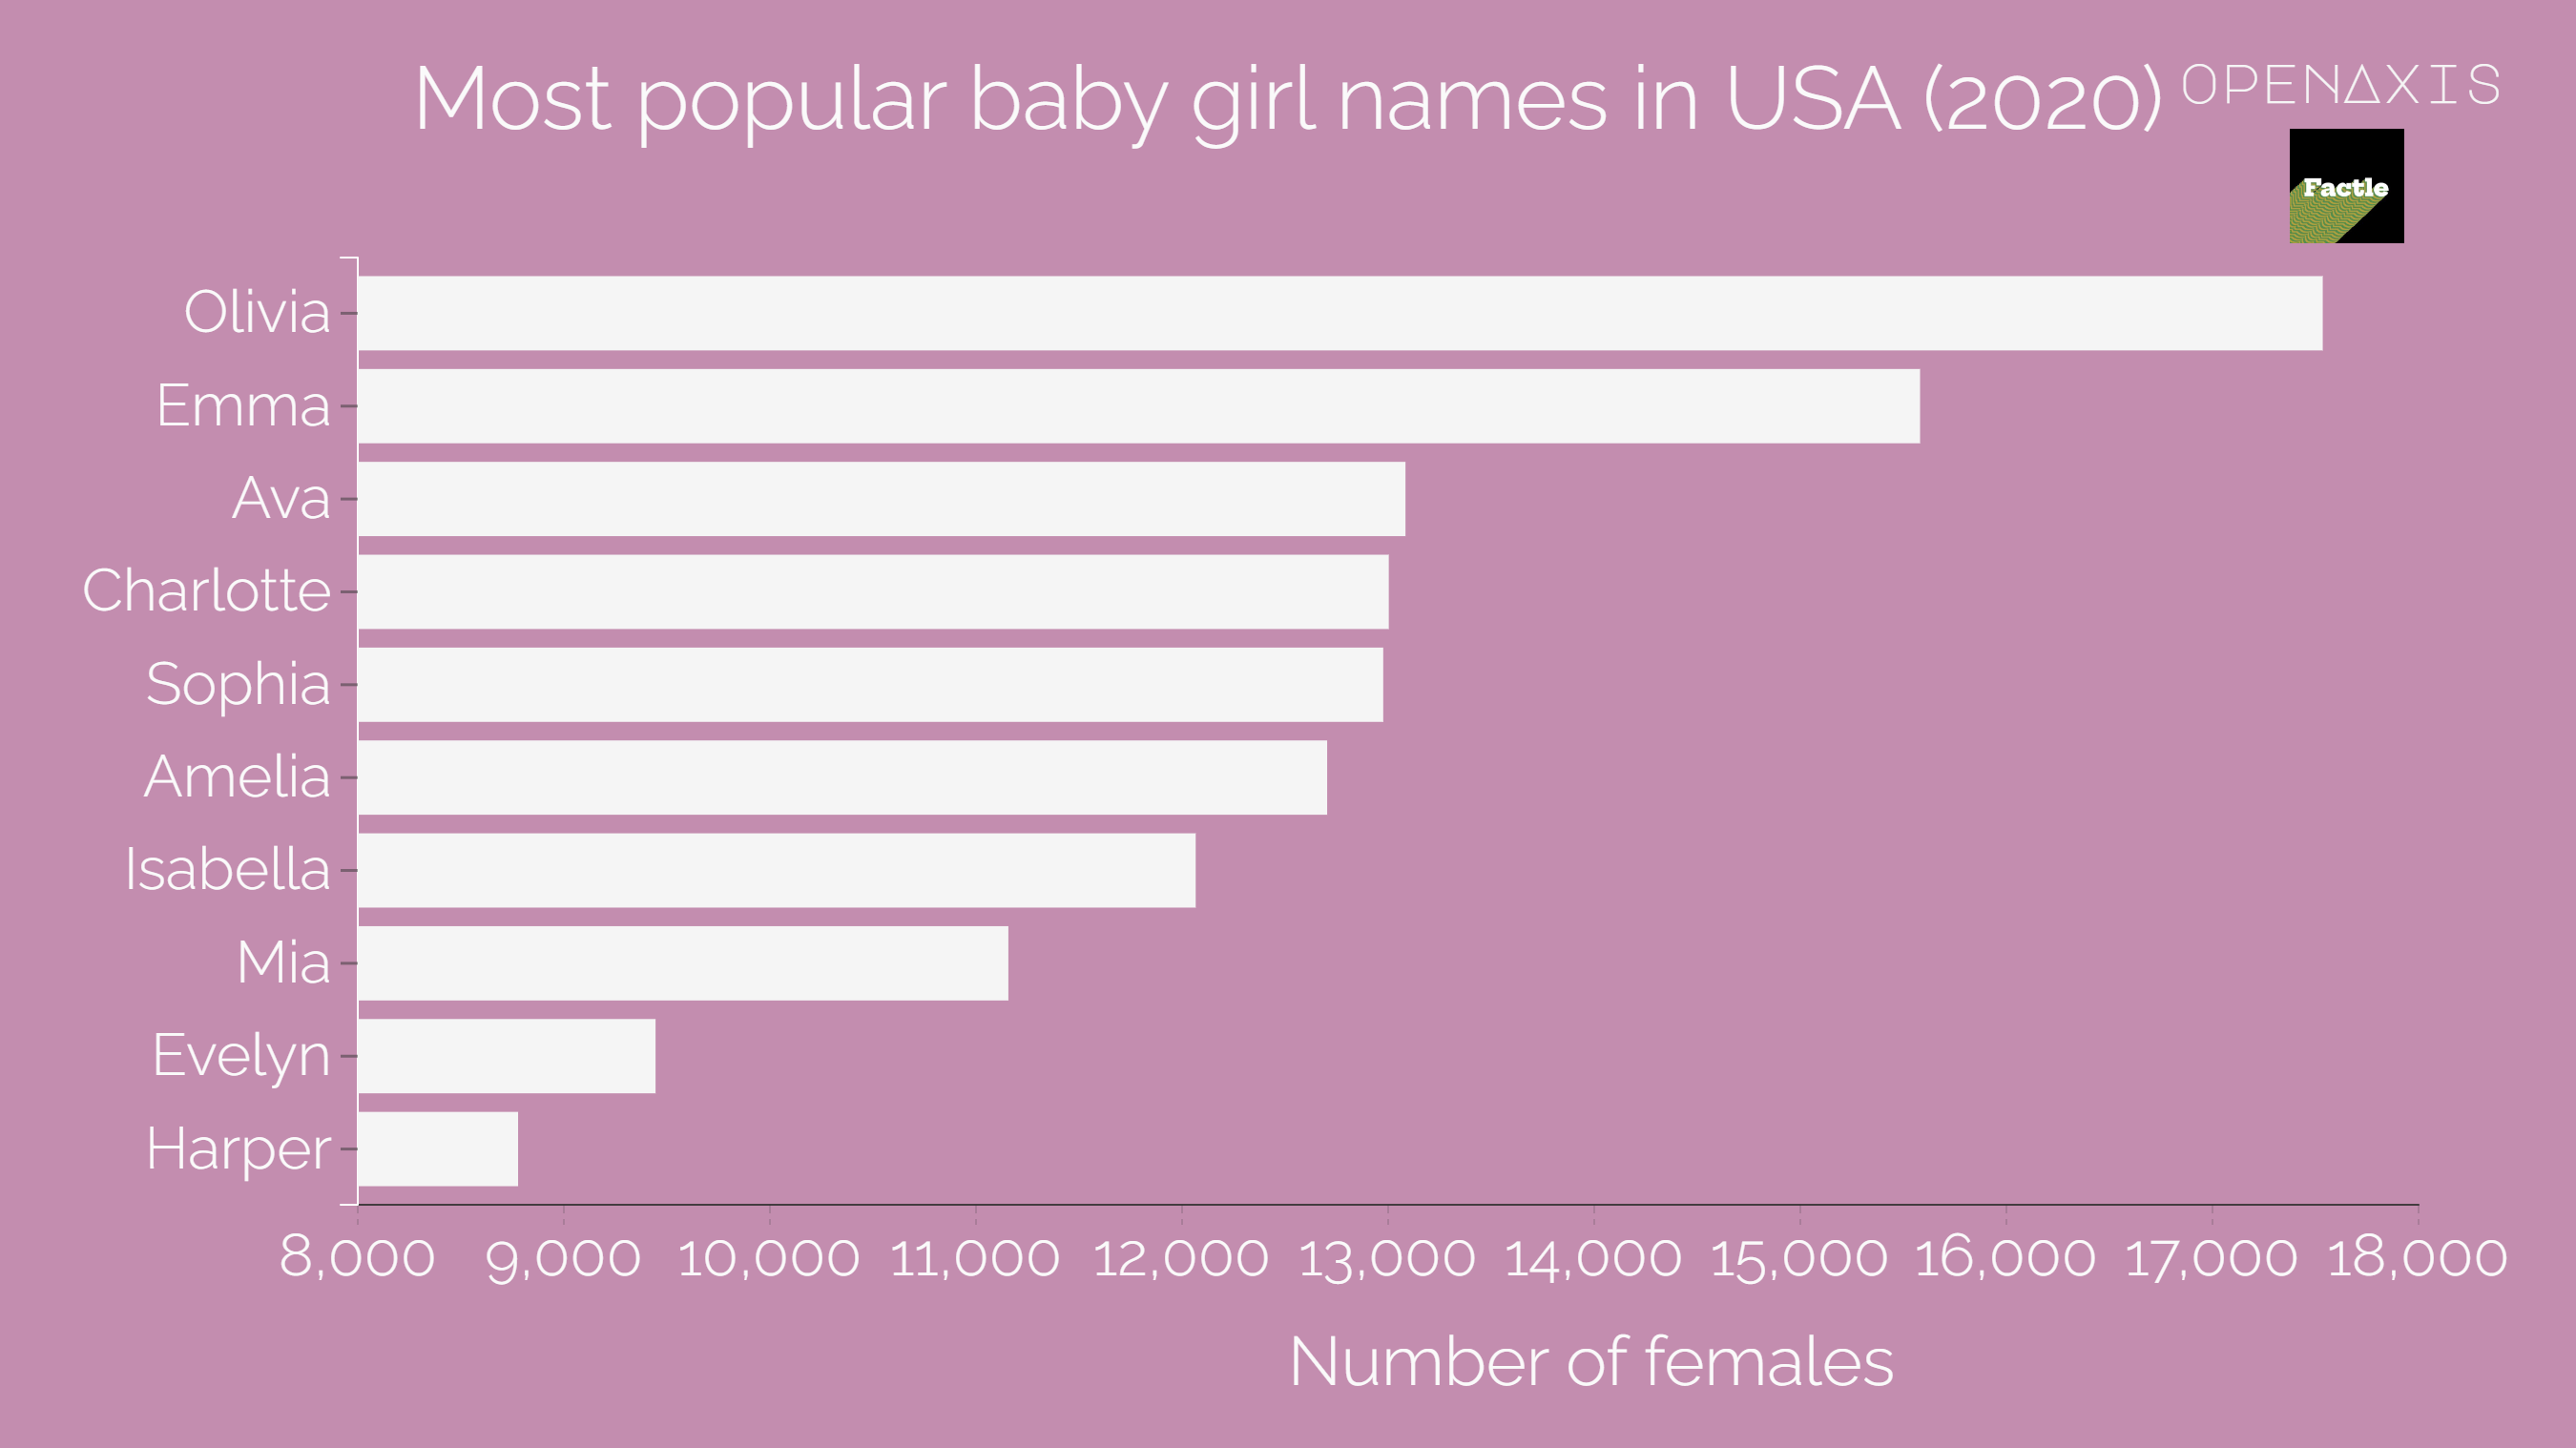 "Most popular baby girl names in USA (2020)"